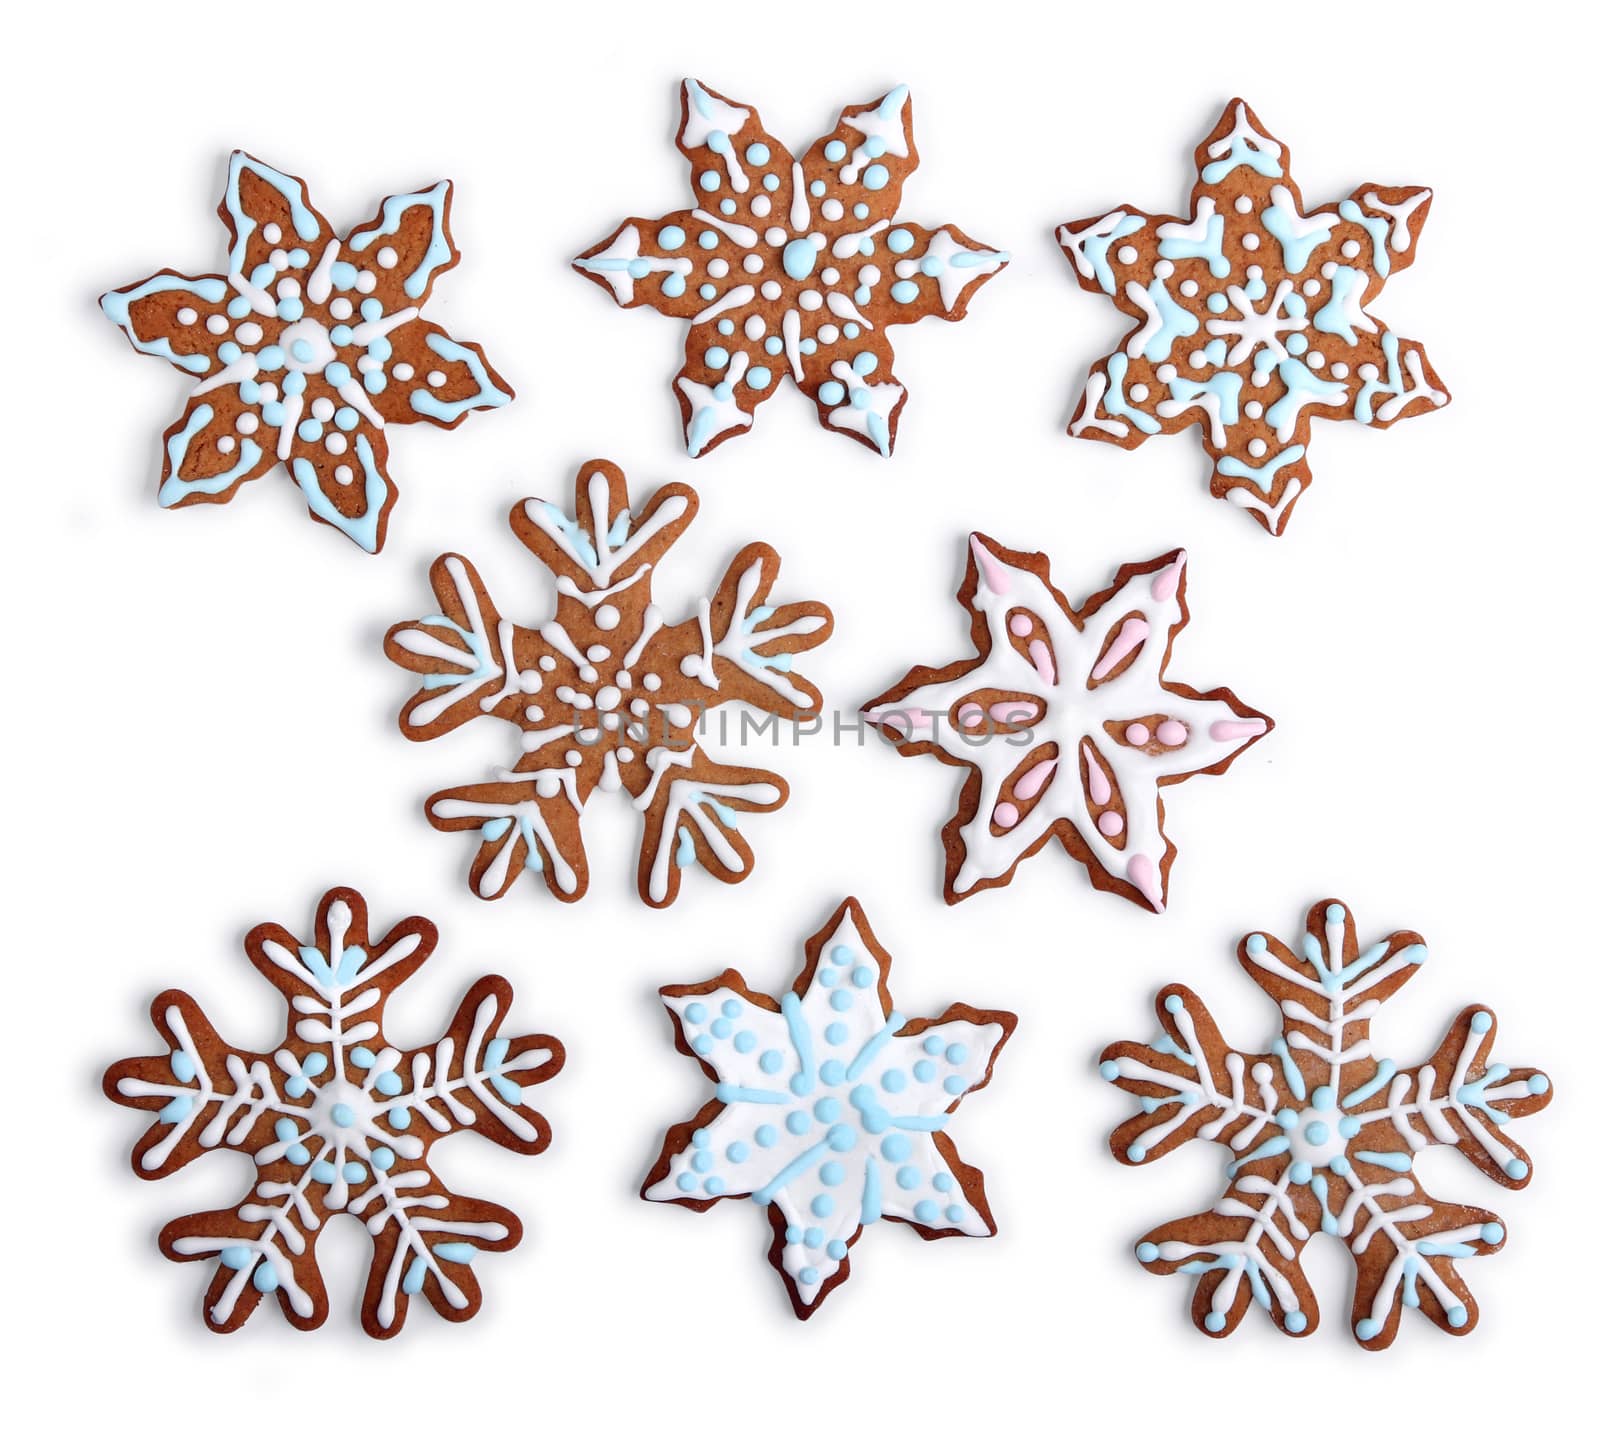 Homemade snowflake shaped gingerbread cookies with sugar icing, on white background isolated